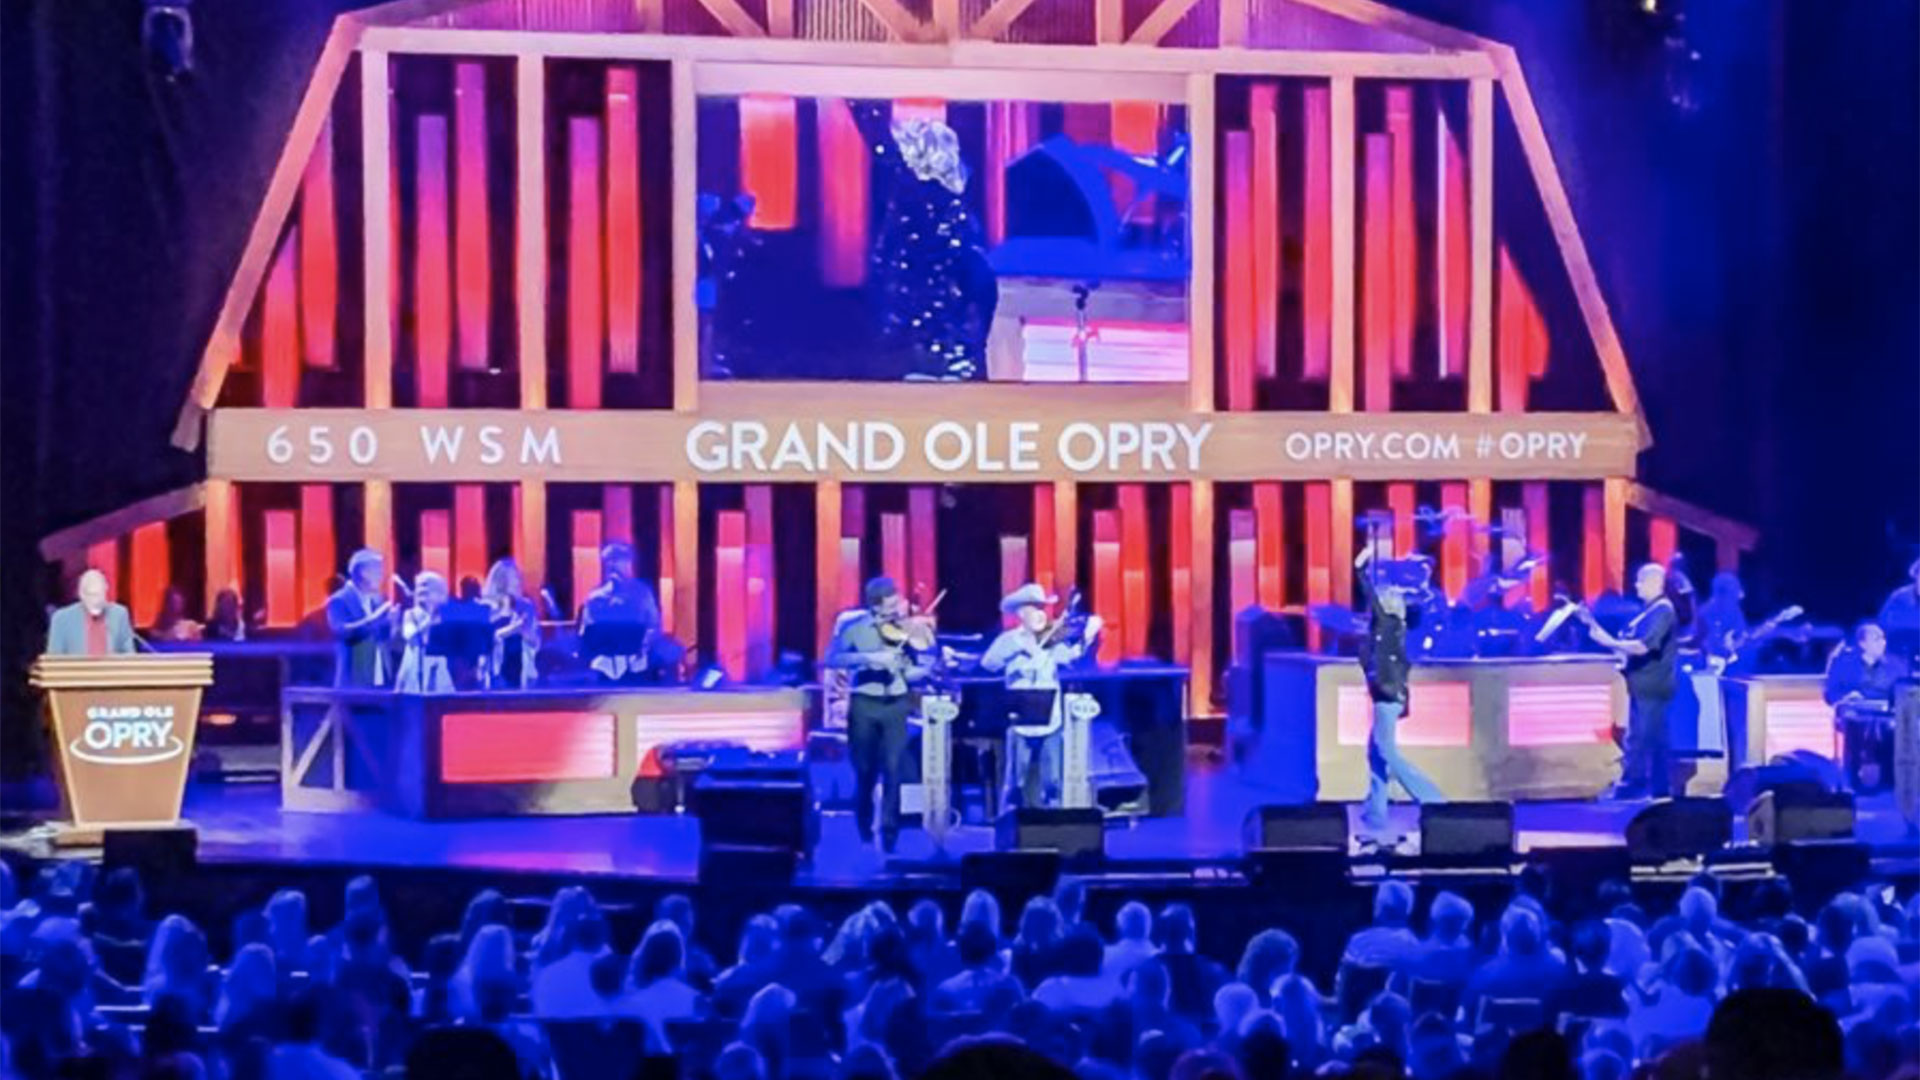 Grand Ole Opry Show Ticket 01